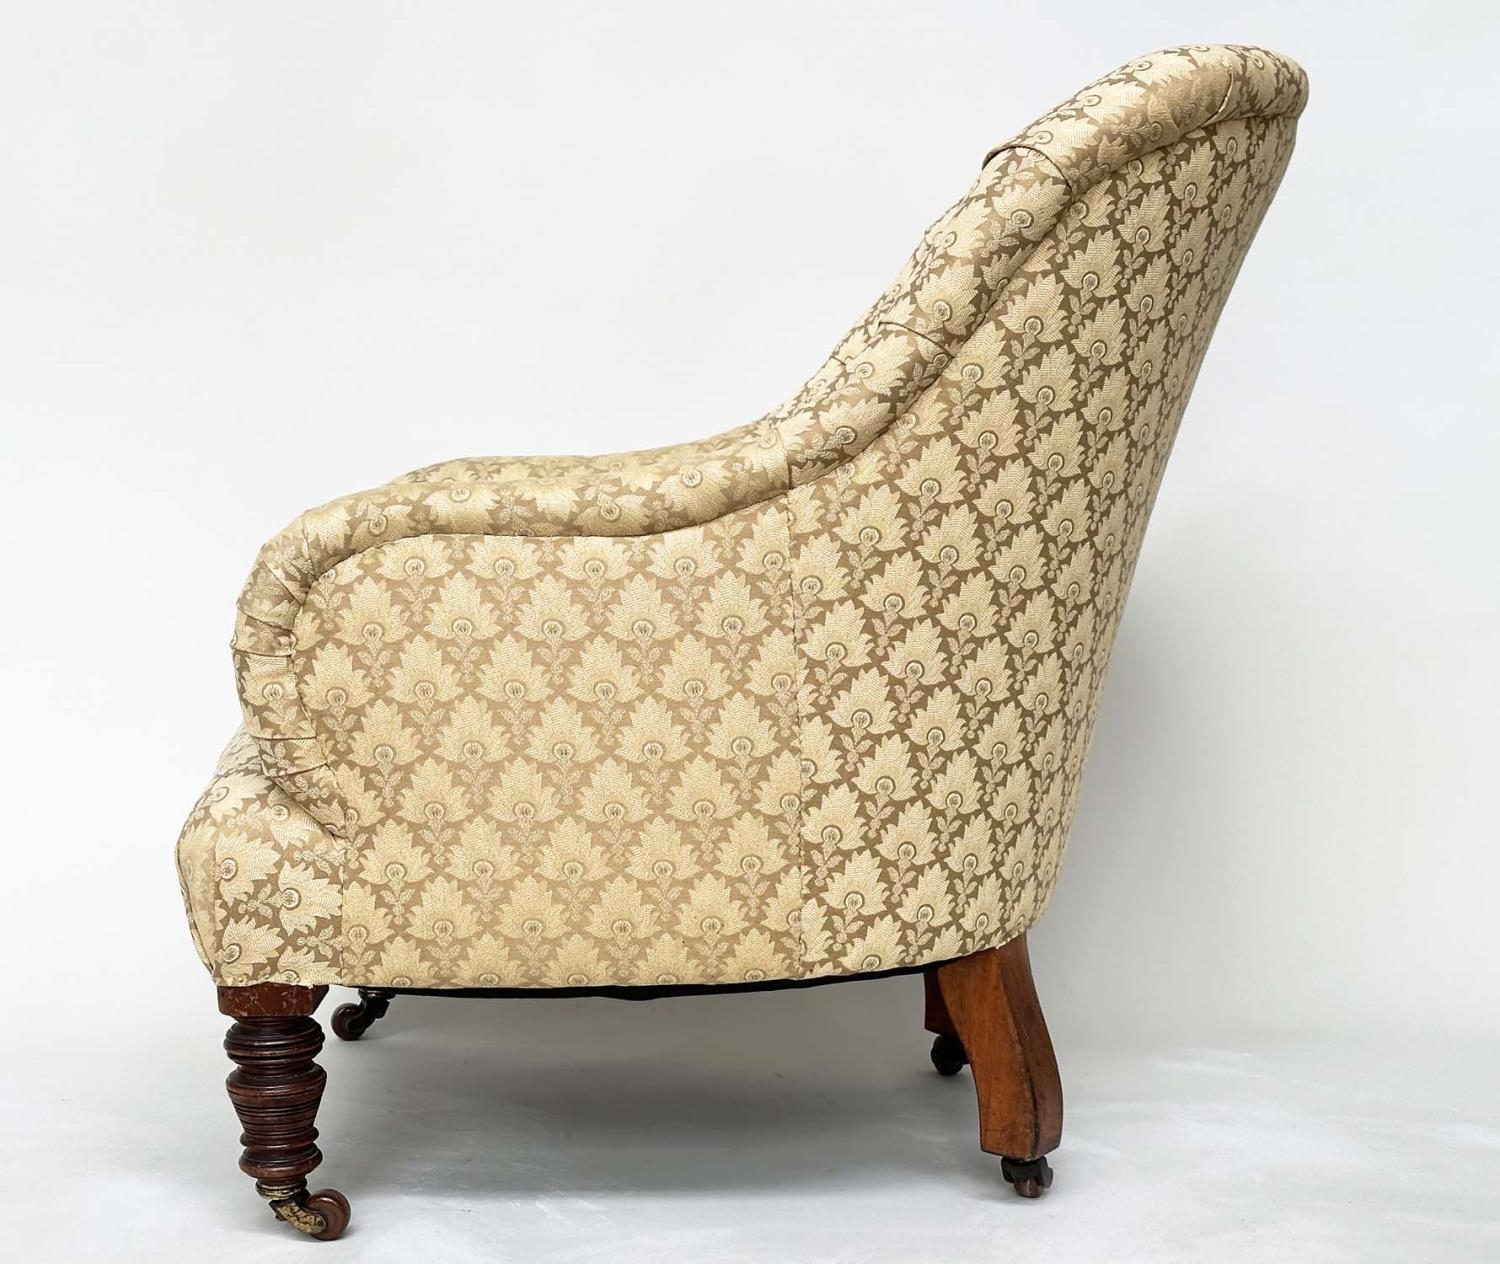 SLIPPER ARMCHAIR, 19th century walnut with two tone maple leaf print upholstery, 85cm H. - Image 9 of 10